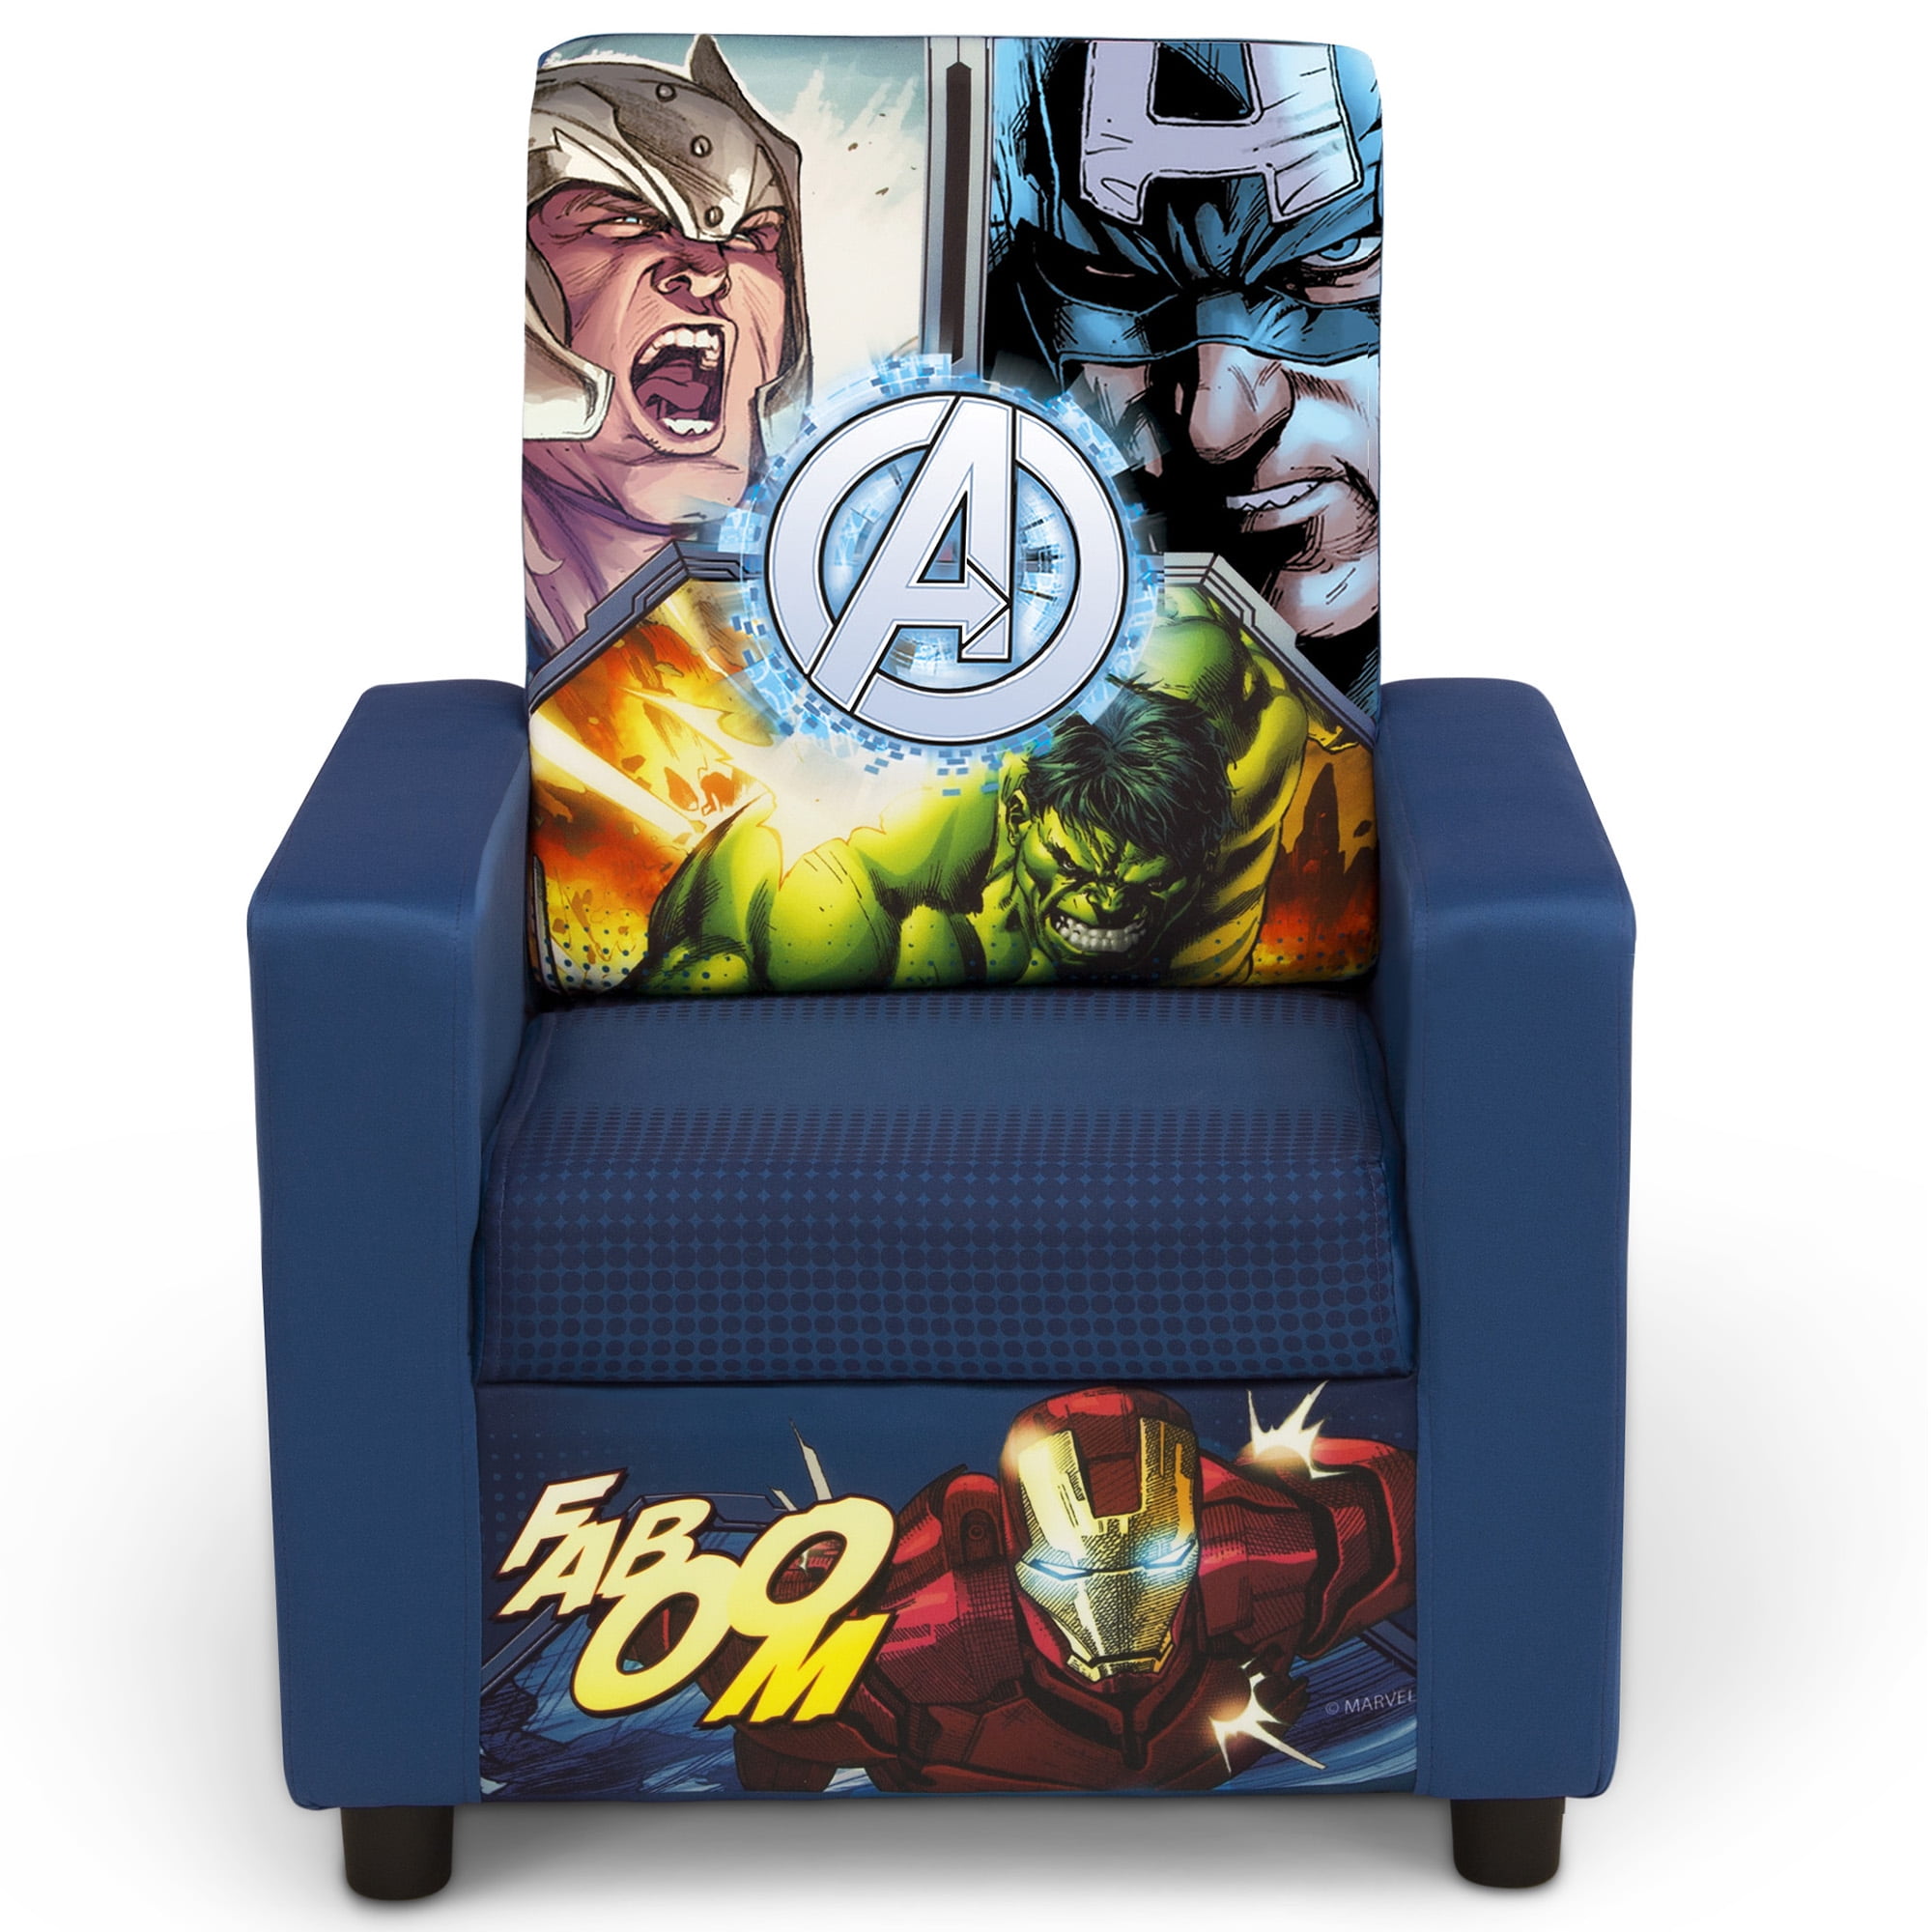 Marvel Spidey and His Amazing Friends Cozee Flip-out Chair - 2-in-1 Convertible Chair to Lounger for Kids by Delta Children